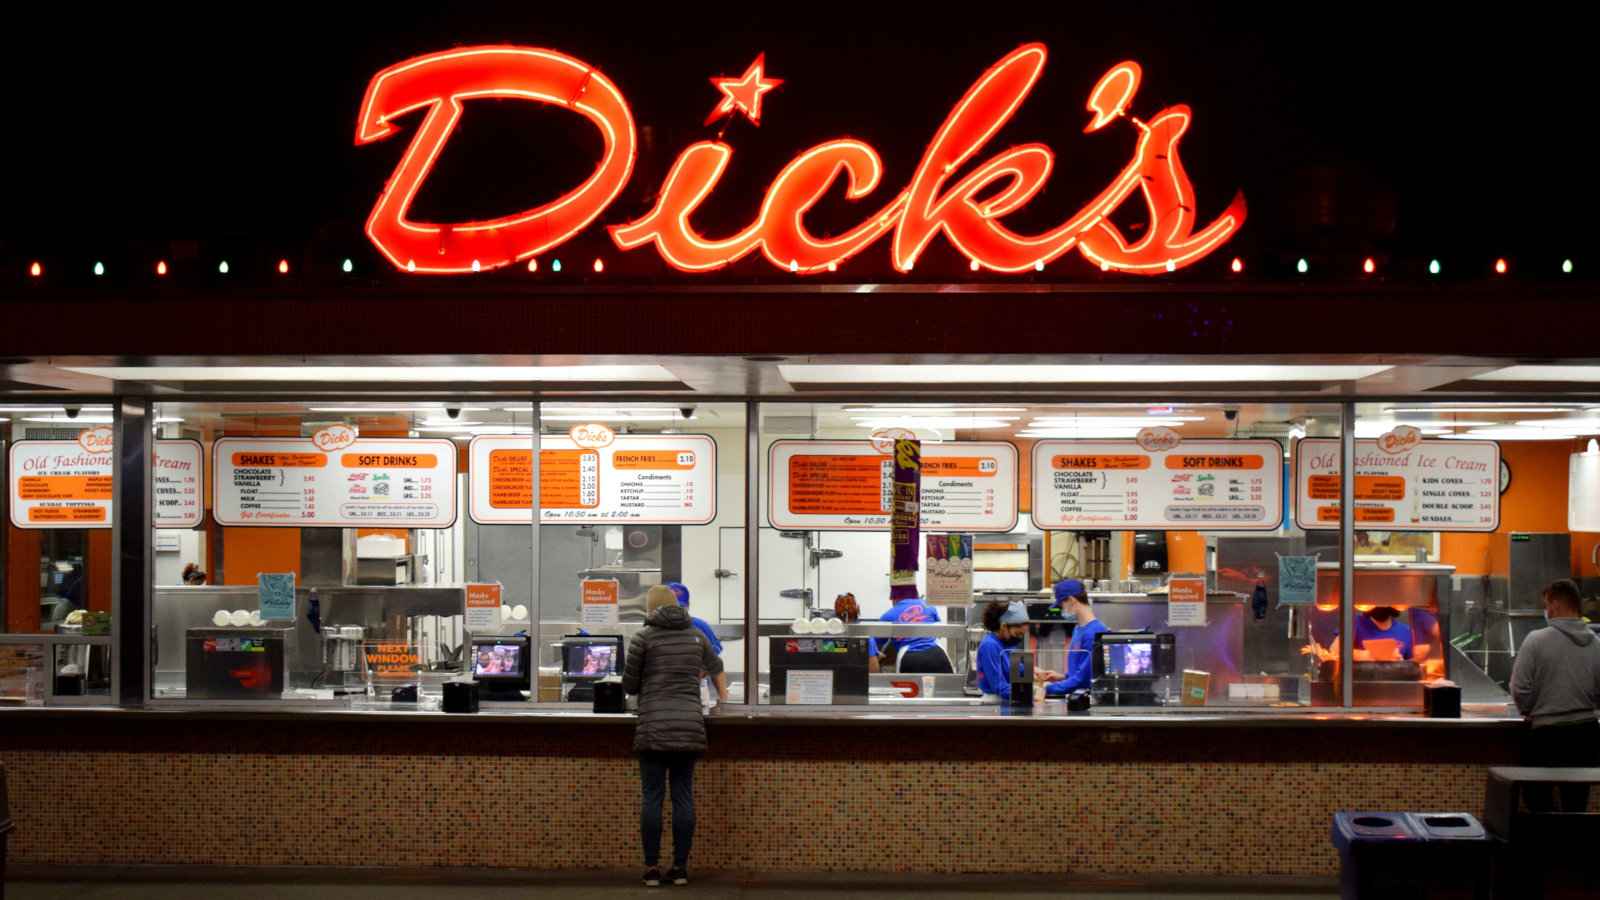 Dick's in Seattle is just one part that makes Washington one of the gayest states in the USA